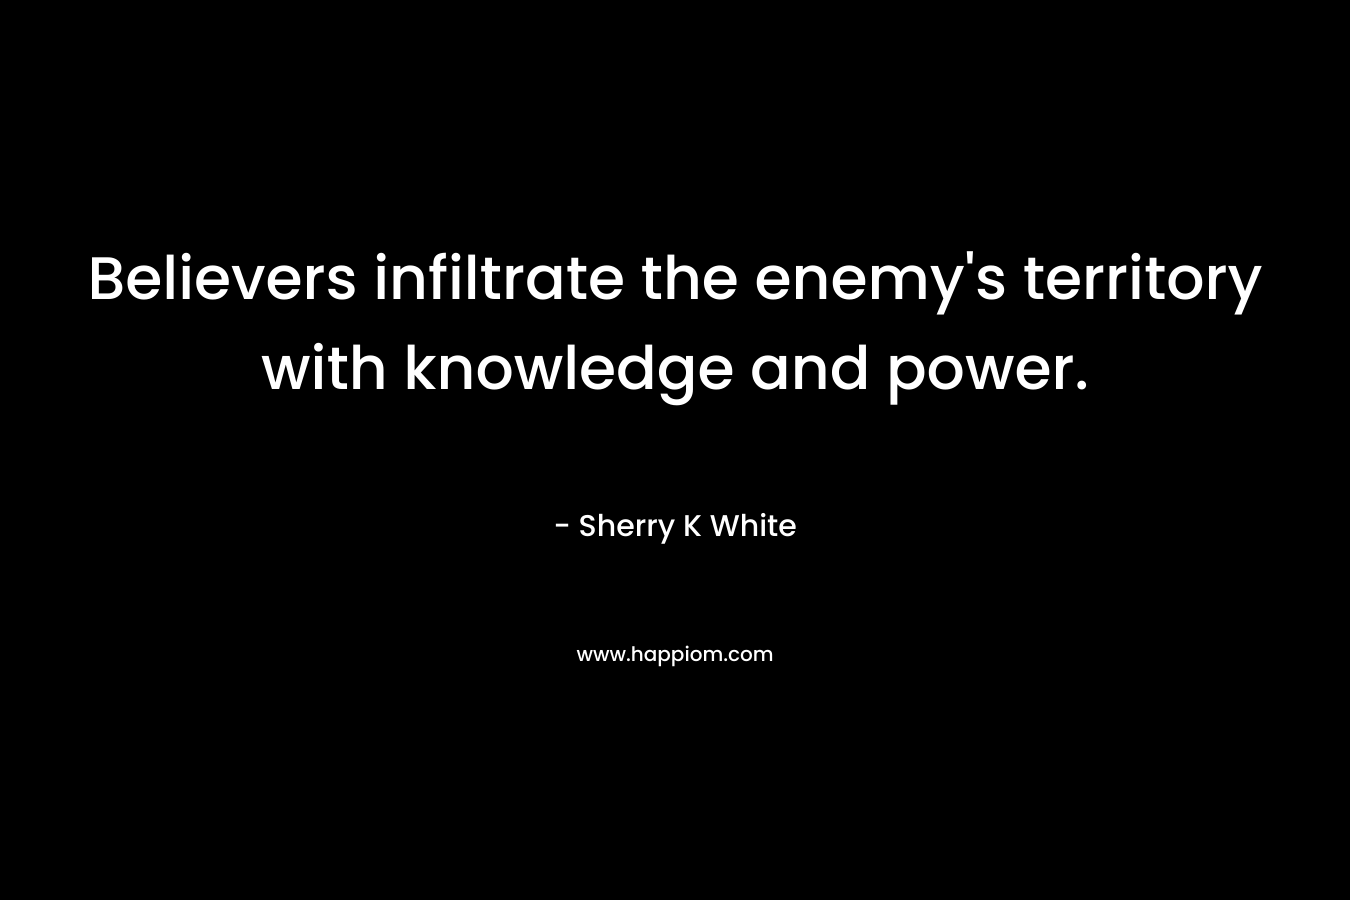 Believers infiltrate the enemy’s territory with knowledge and power. – Sherry K White